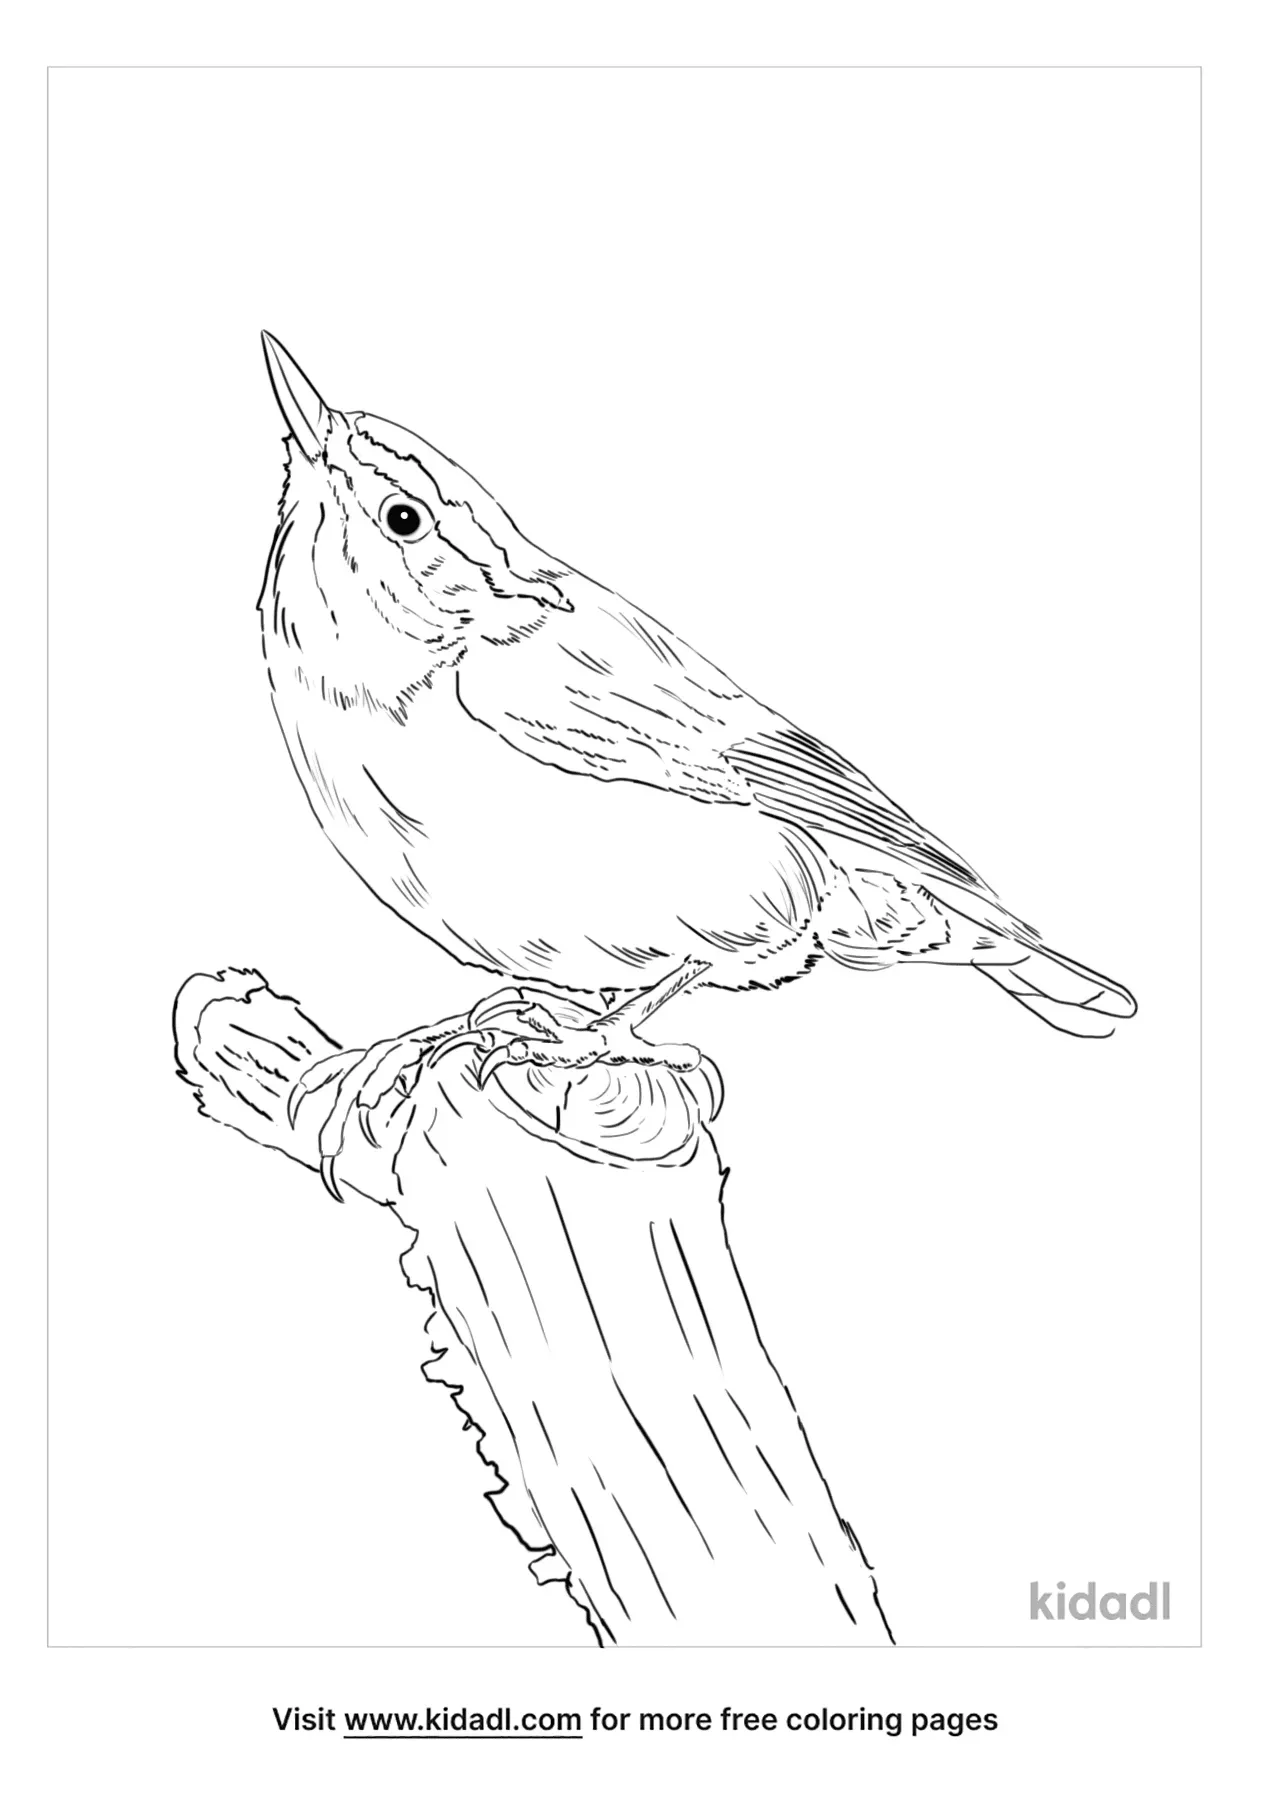 Black-Capped Sparrow Coloring Page | Free Birds Coloring Page | Kidadl